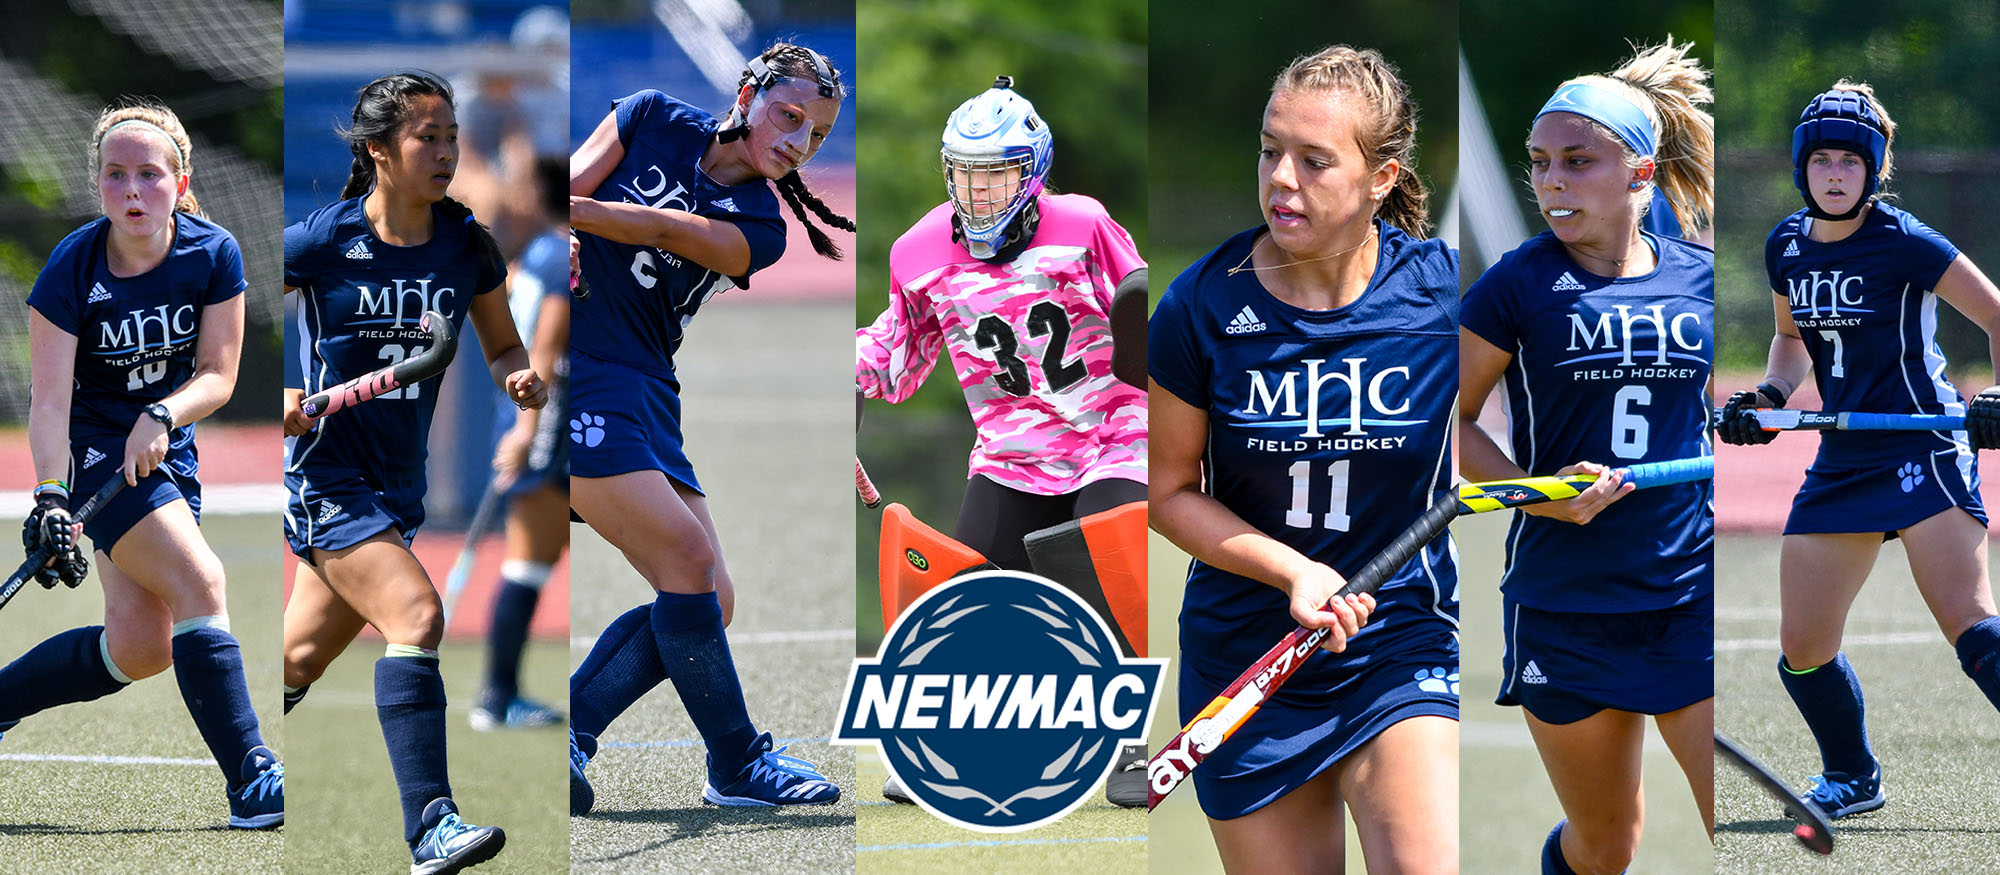 Eight Field Hockey Student-Athletes Earn NEWMAC Academic All-Conference Honors